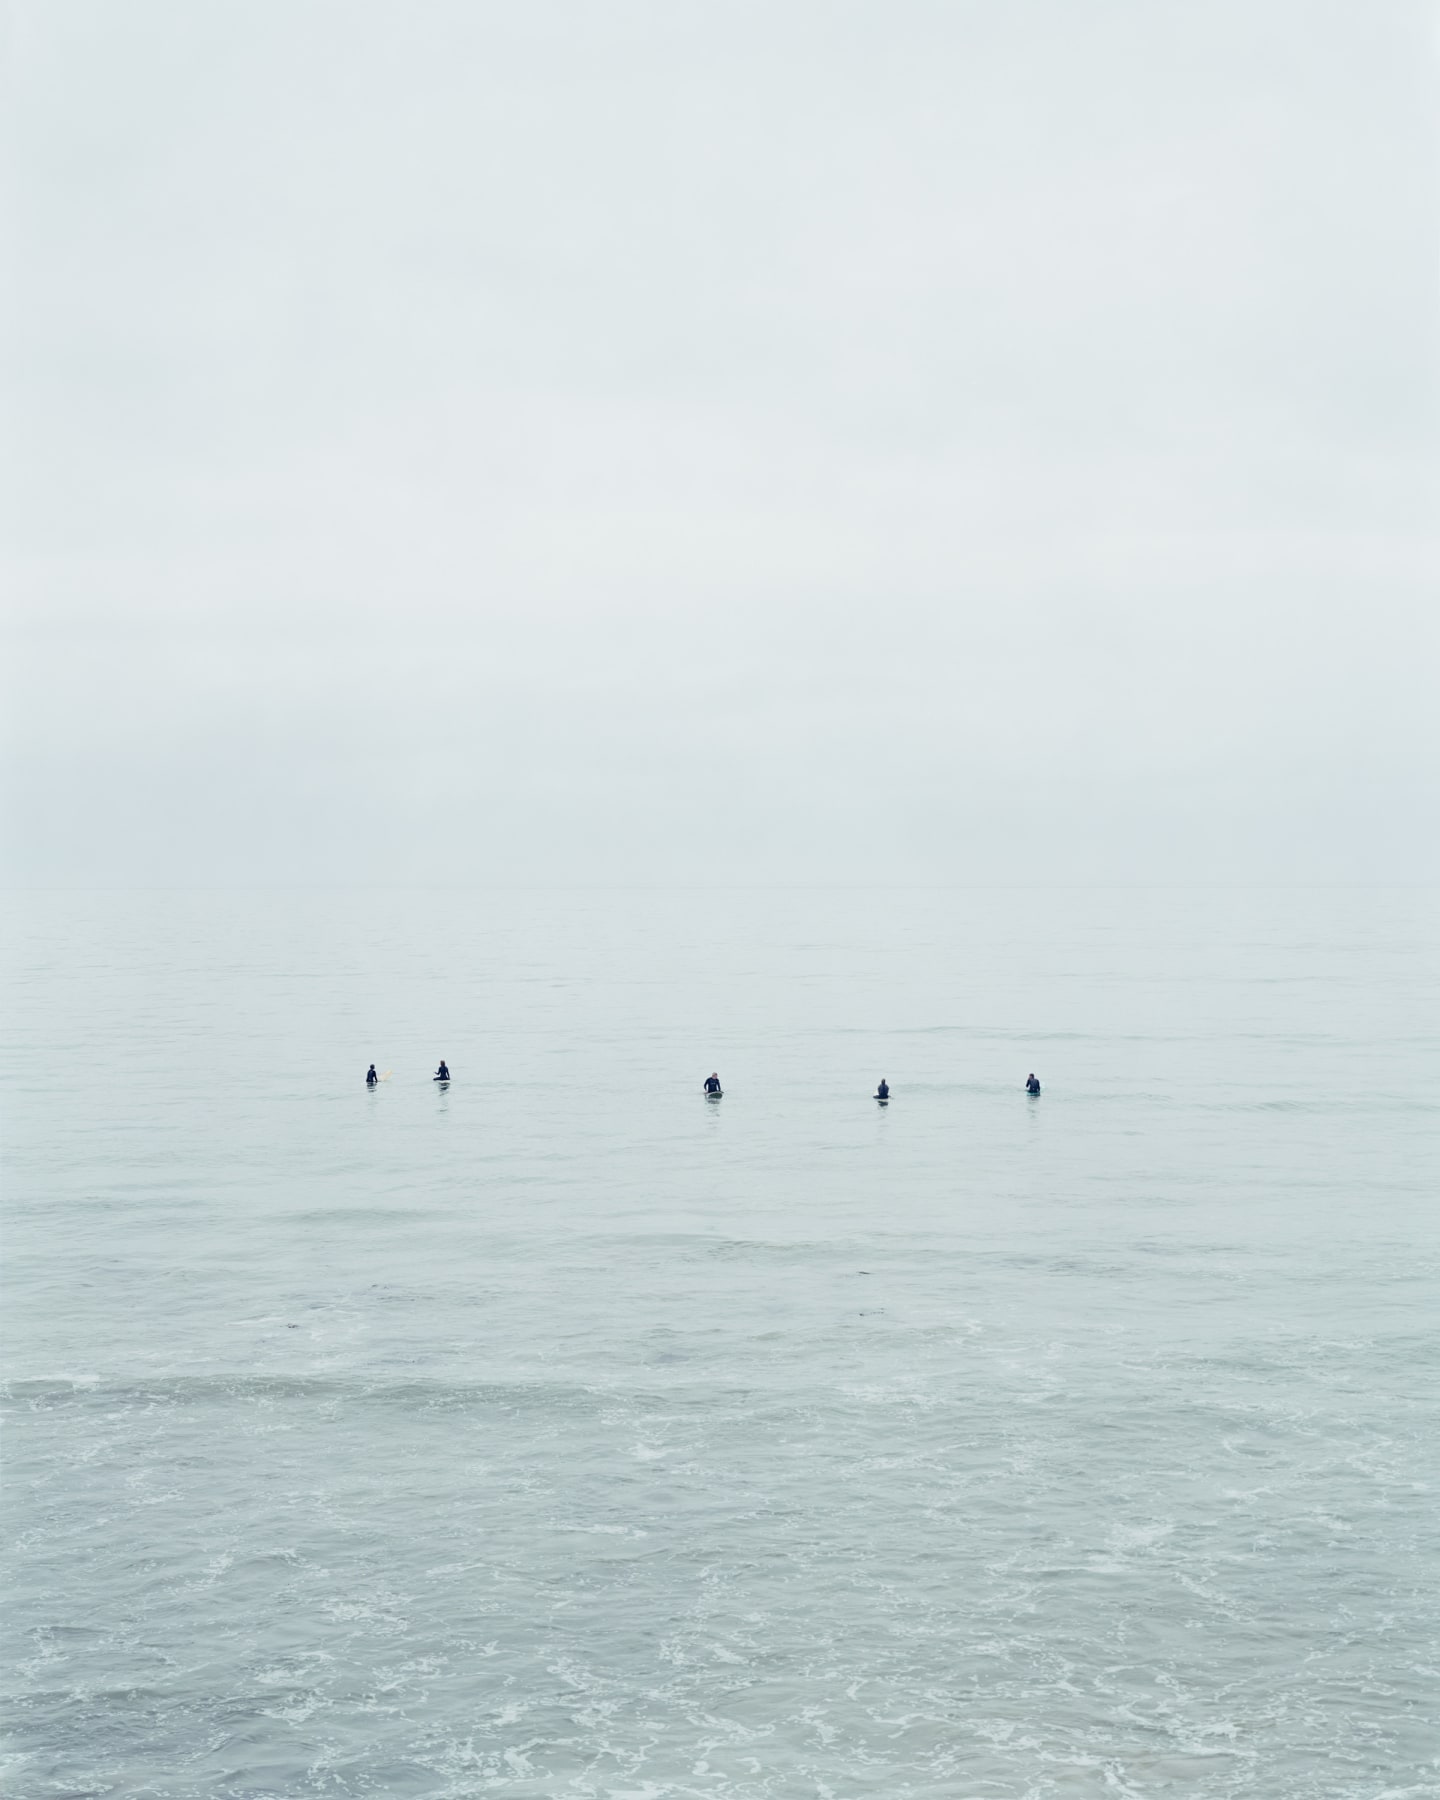 Catherine Opie, Untitled #10 (Surfers)